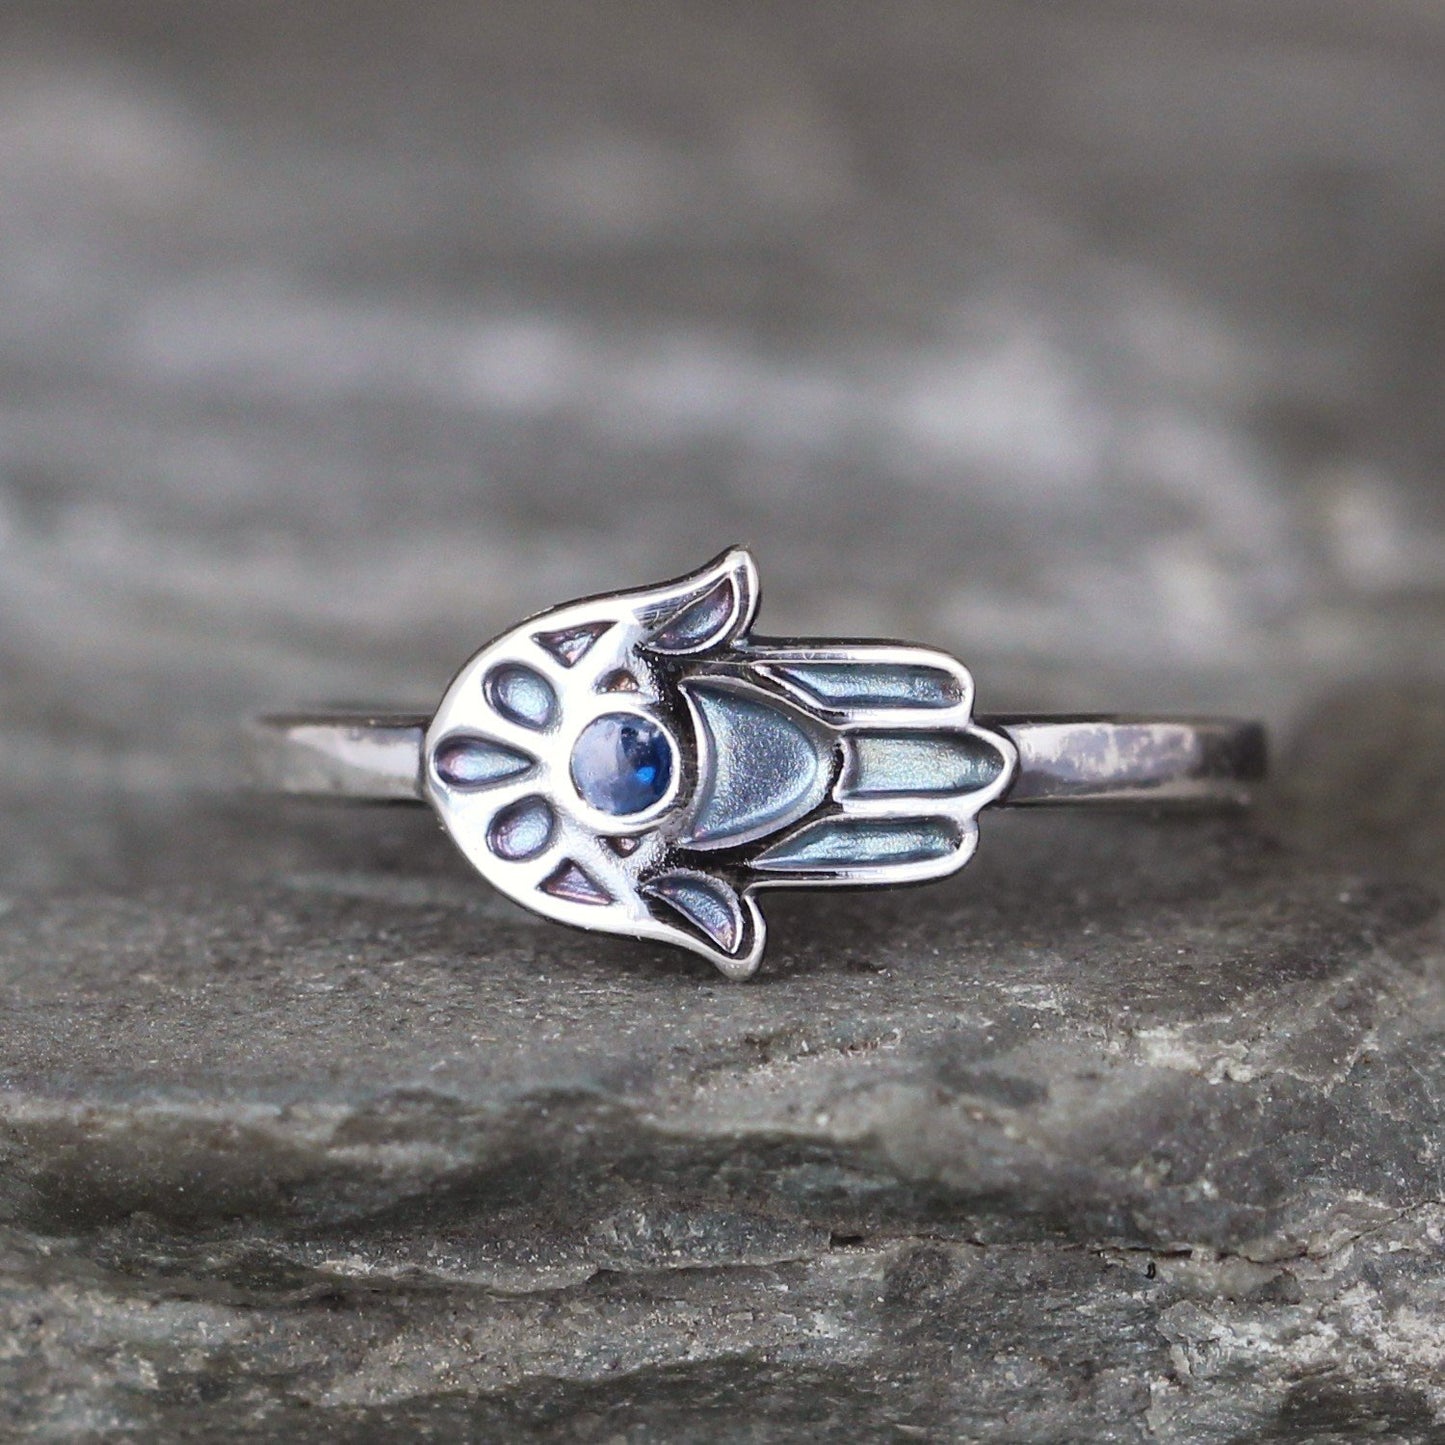 Hamsa Ring - Sterling Silver with Blue Enamel